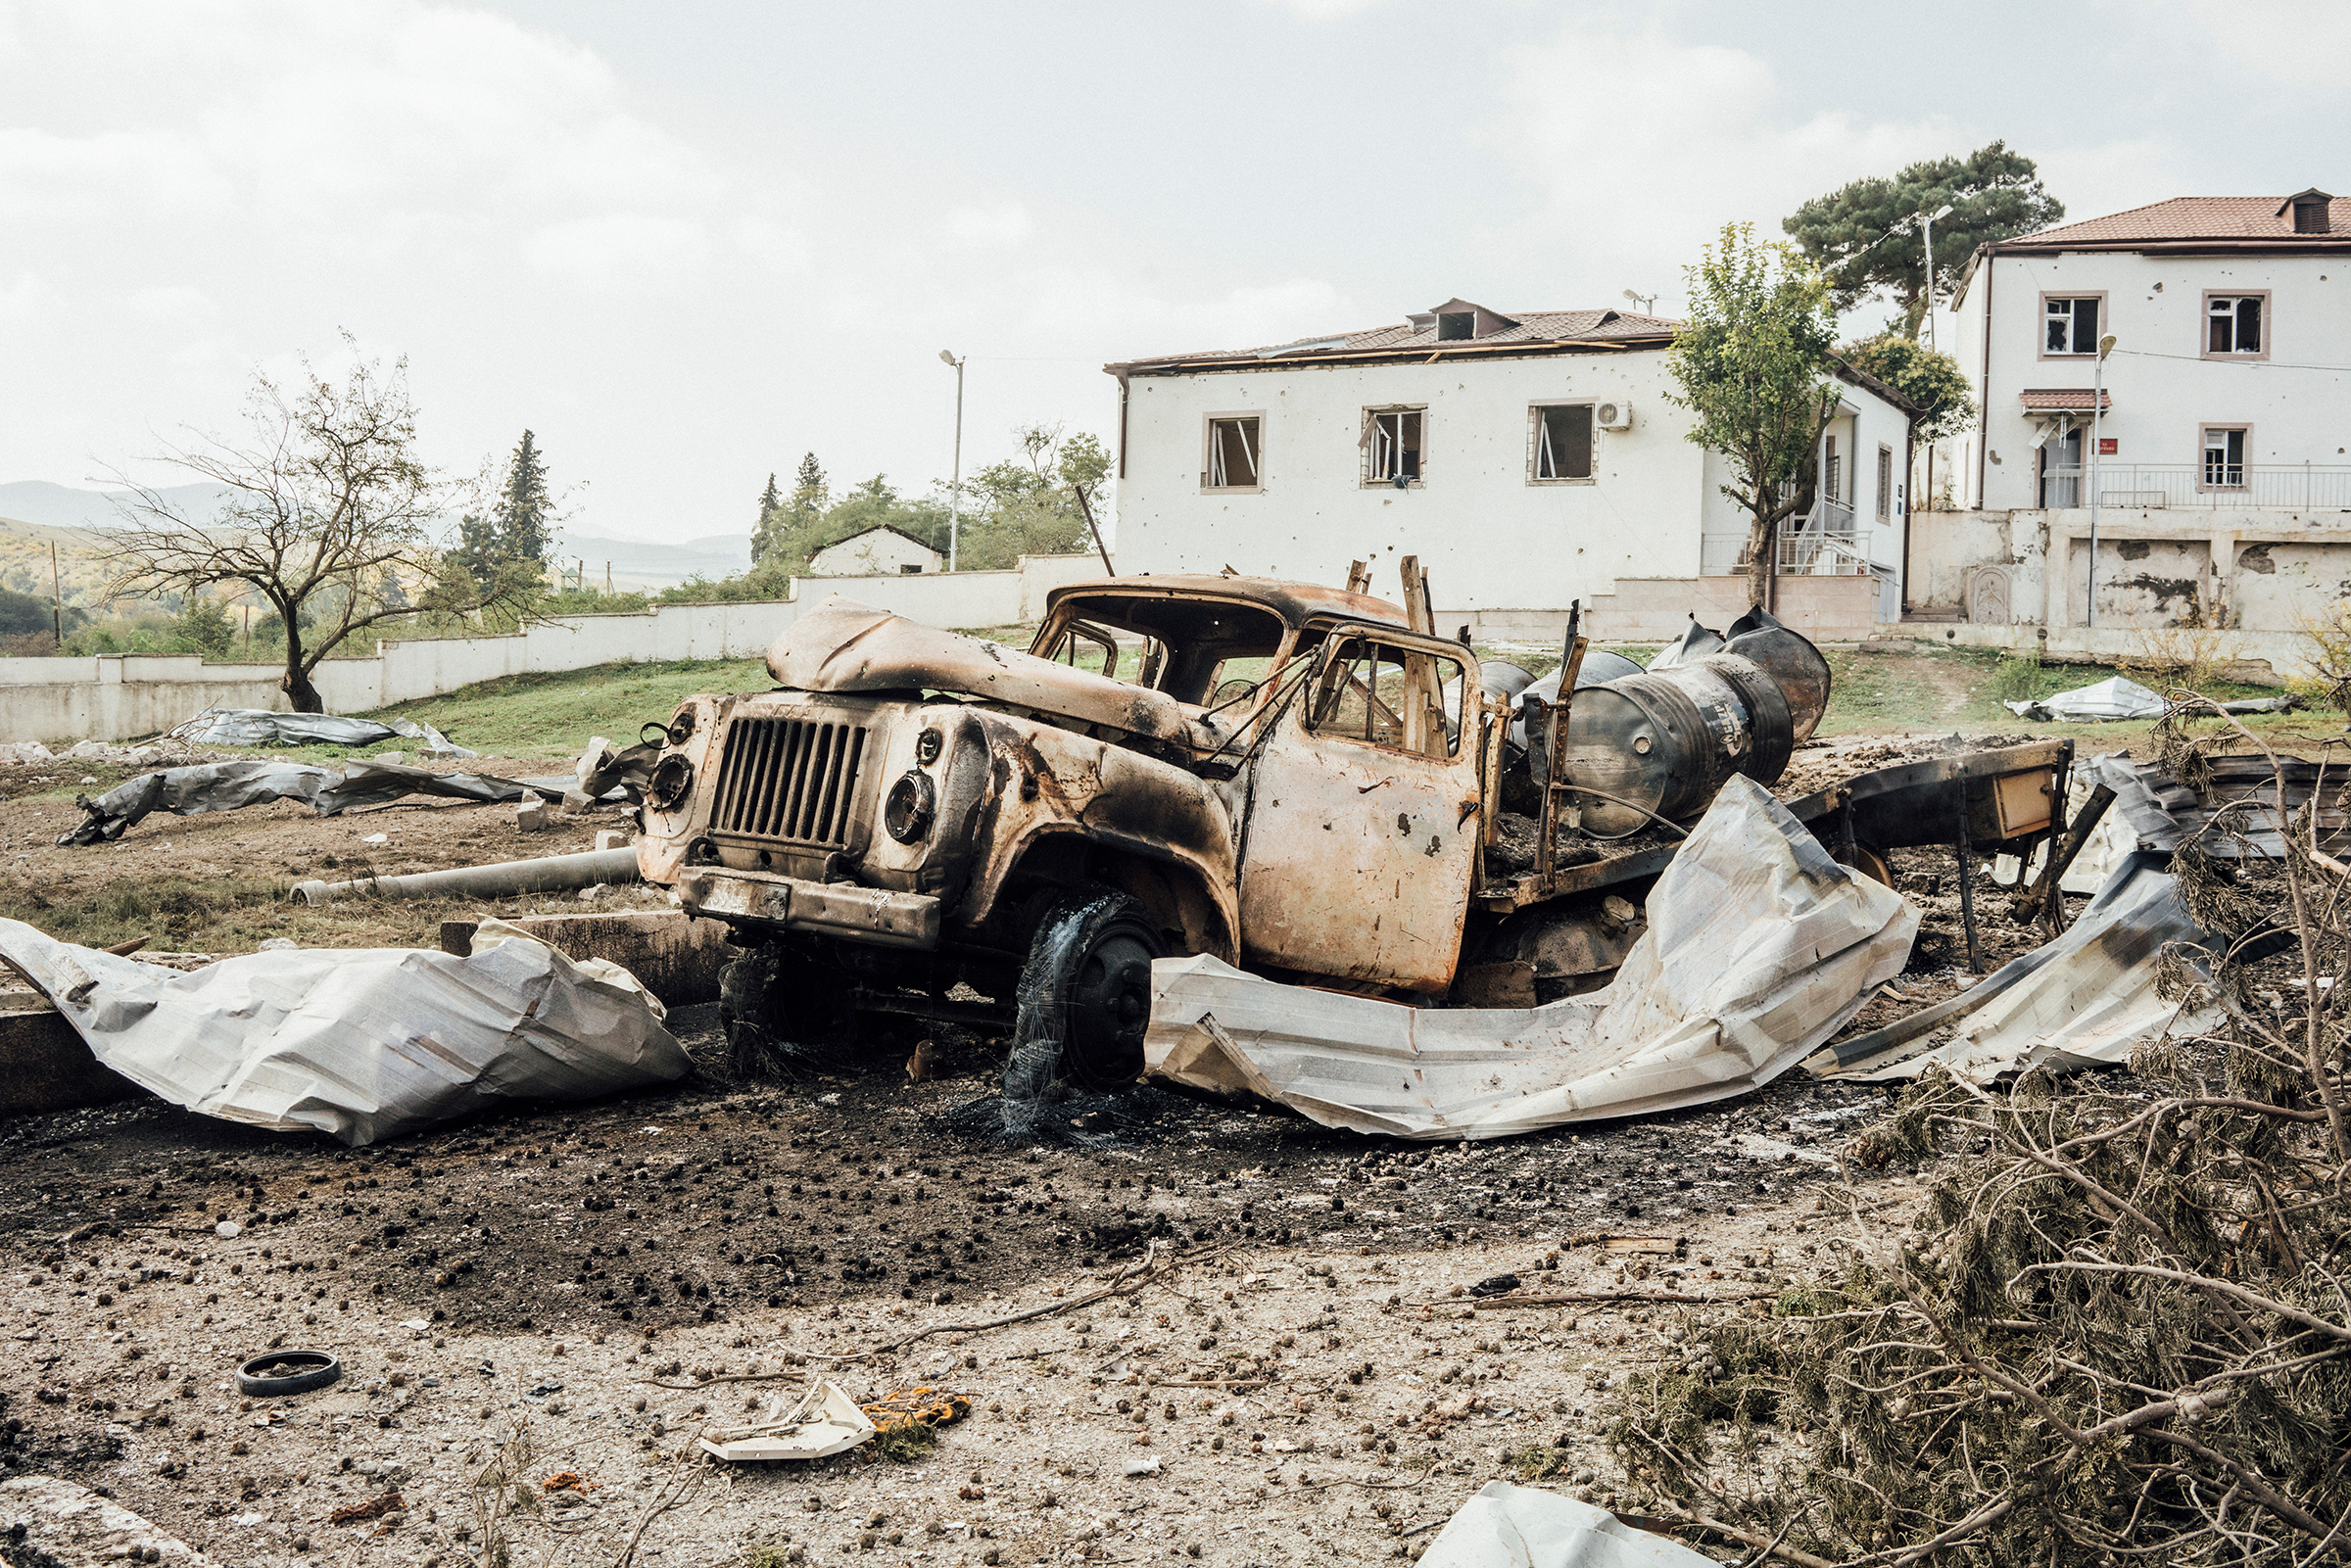 A vehicle destroyed by shelling in the town of Martakert. (Emanuele Satolli)